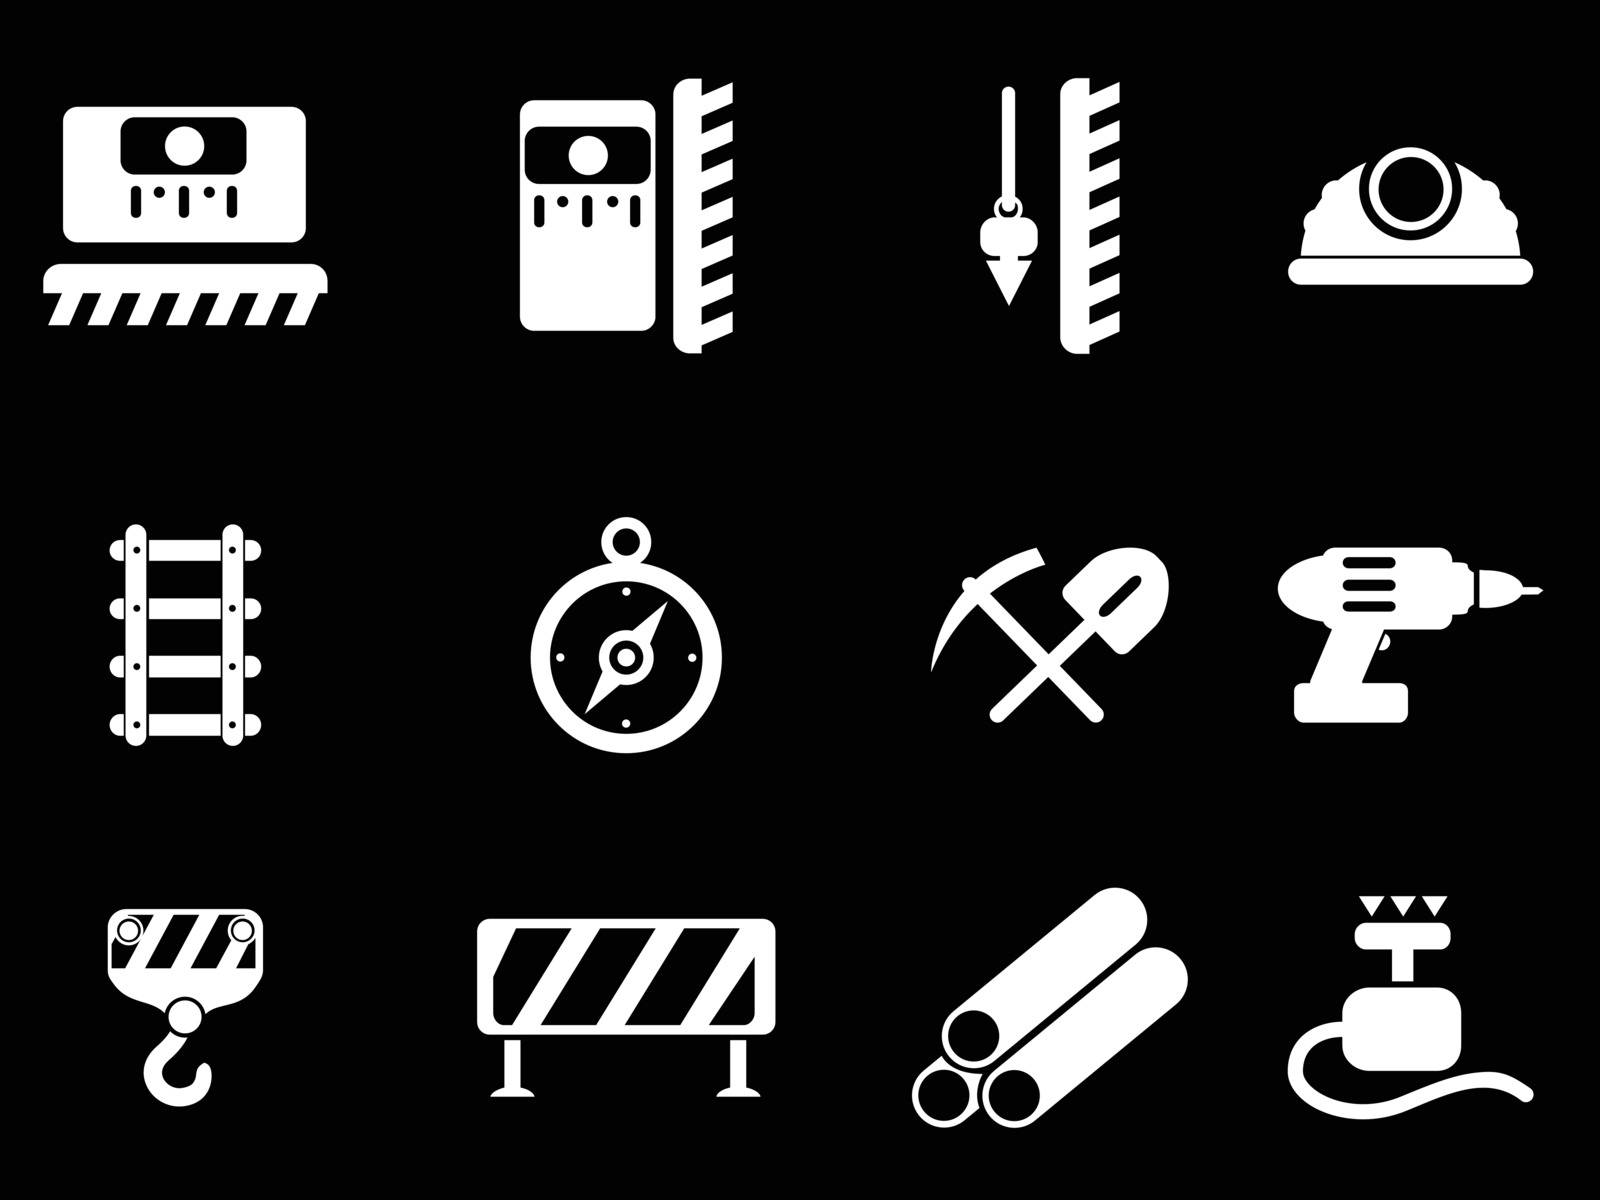 building equipment simply symbol for web icons and user interface